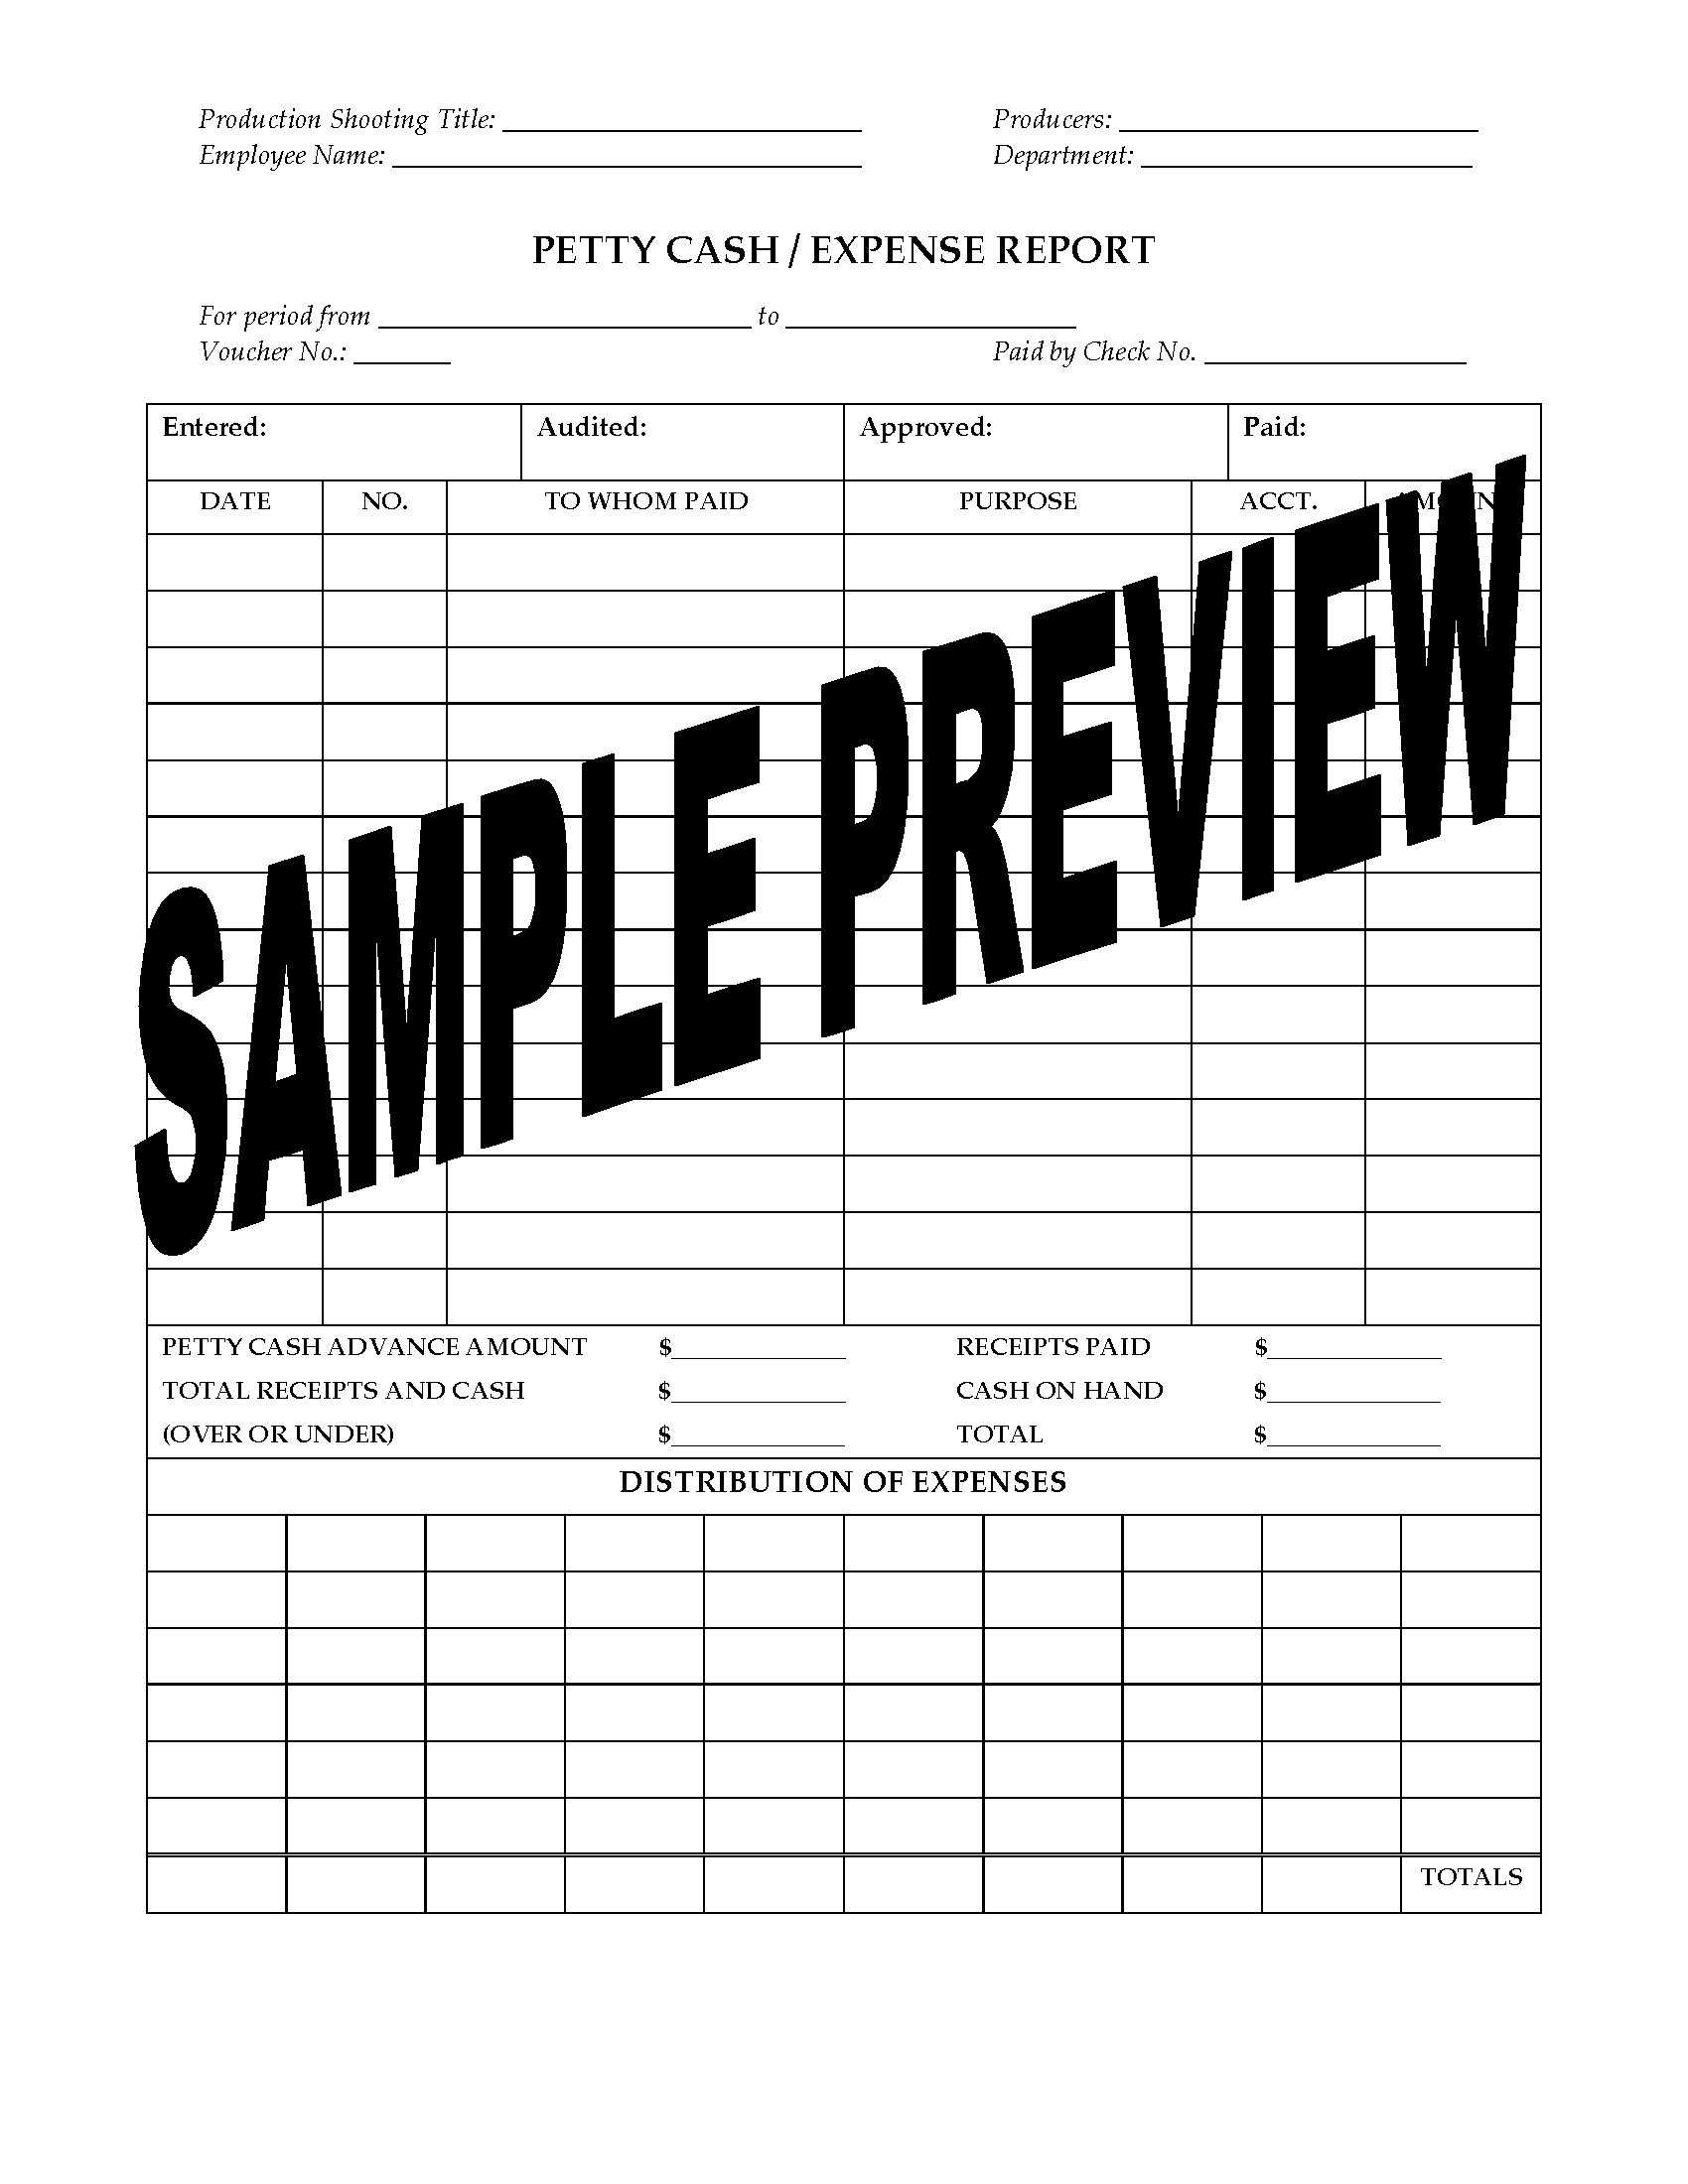 Petty Cash Expense Report For Film Or Tv Production Inside Petty Cash Expense Report Template